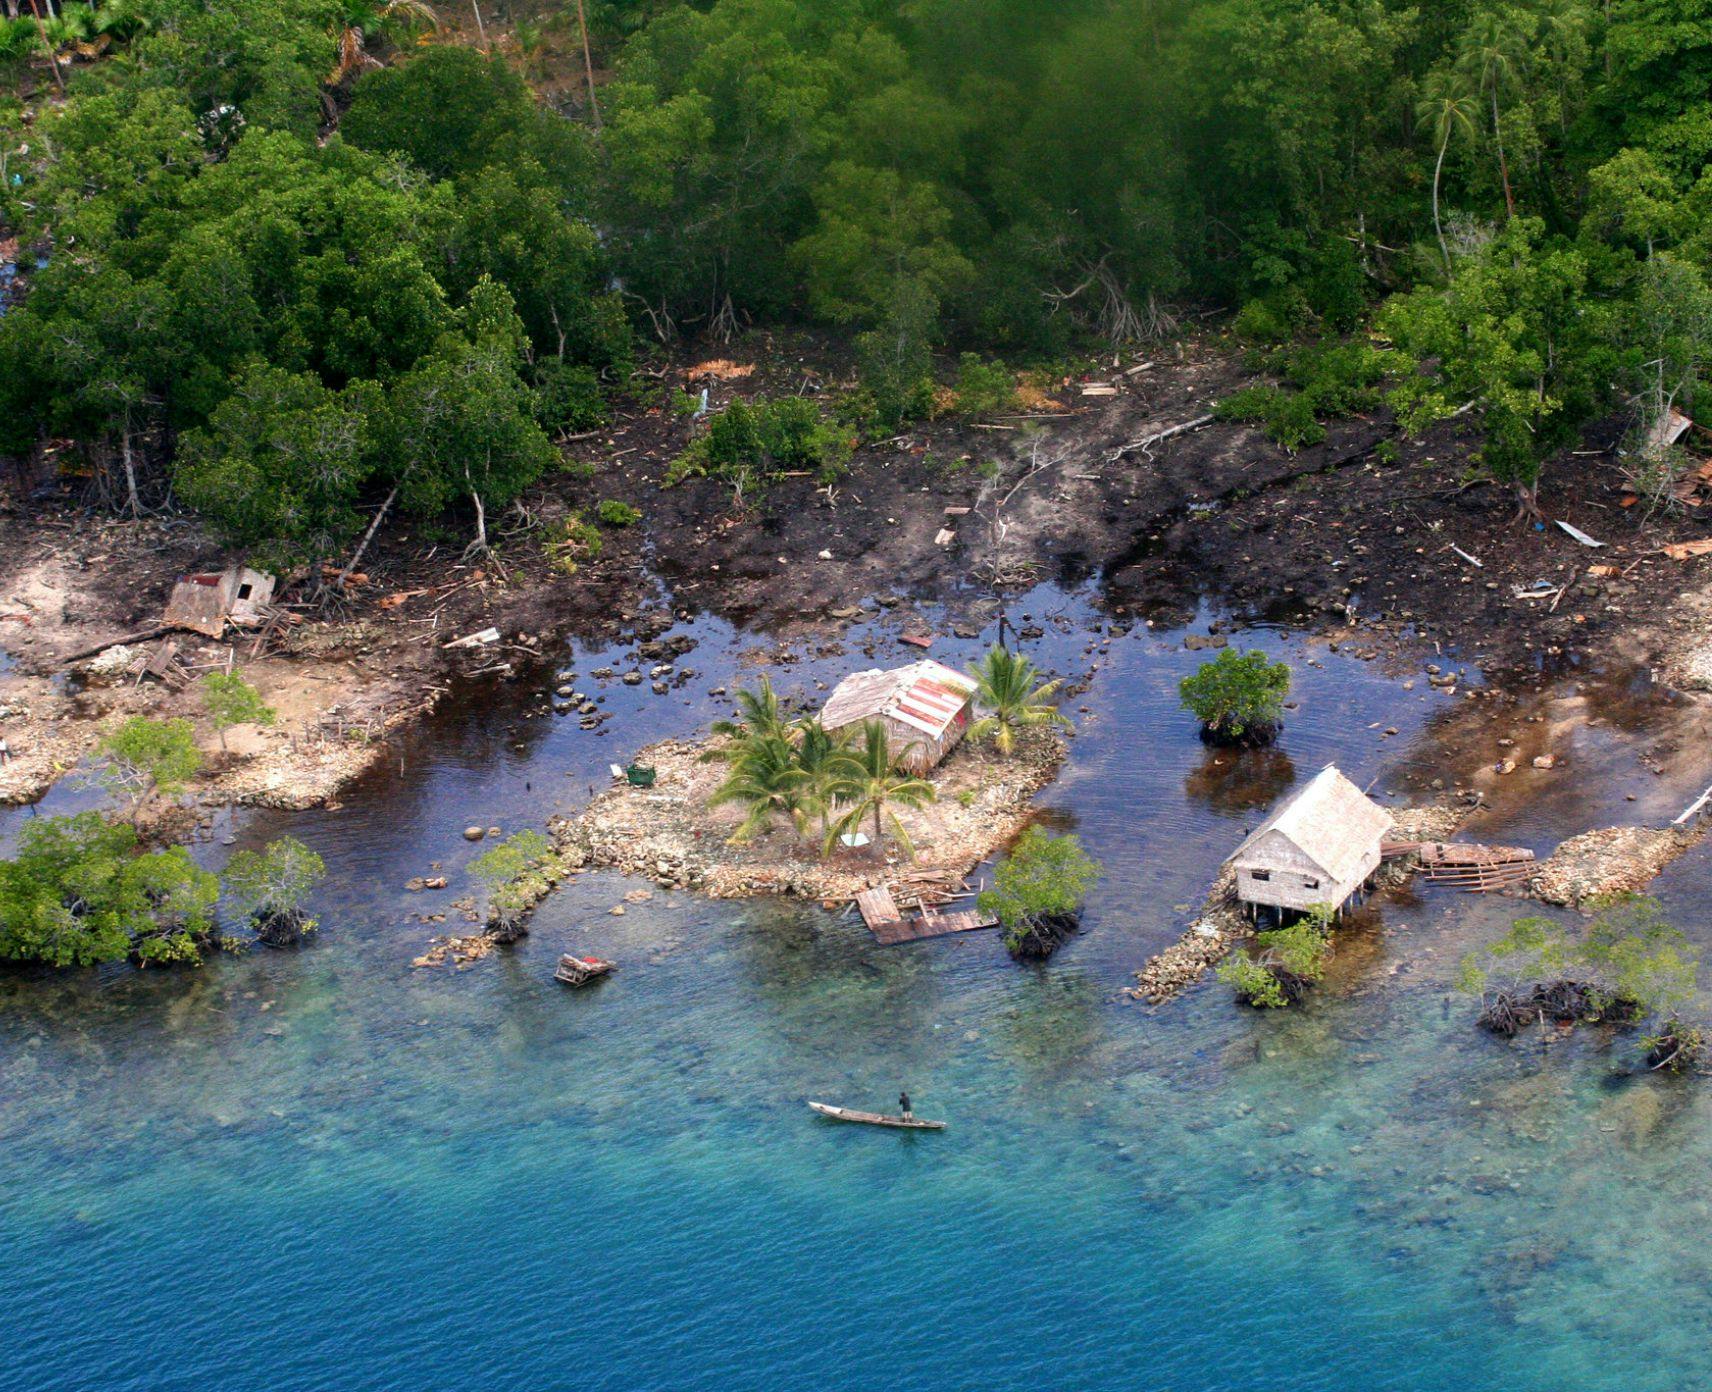 An image of the Solomon Islands after a tsunami, there are trees, isolated houses and blue green ocean.